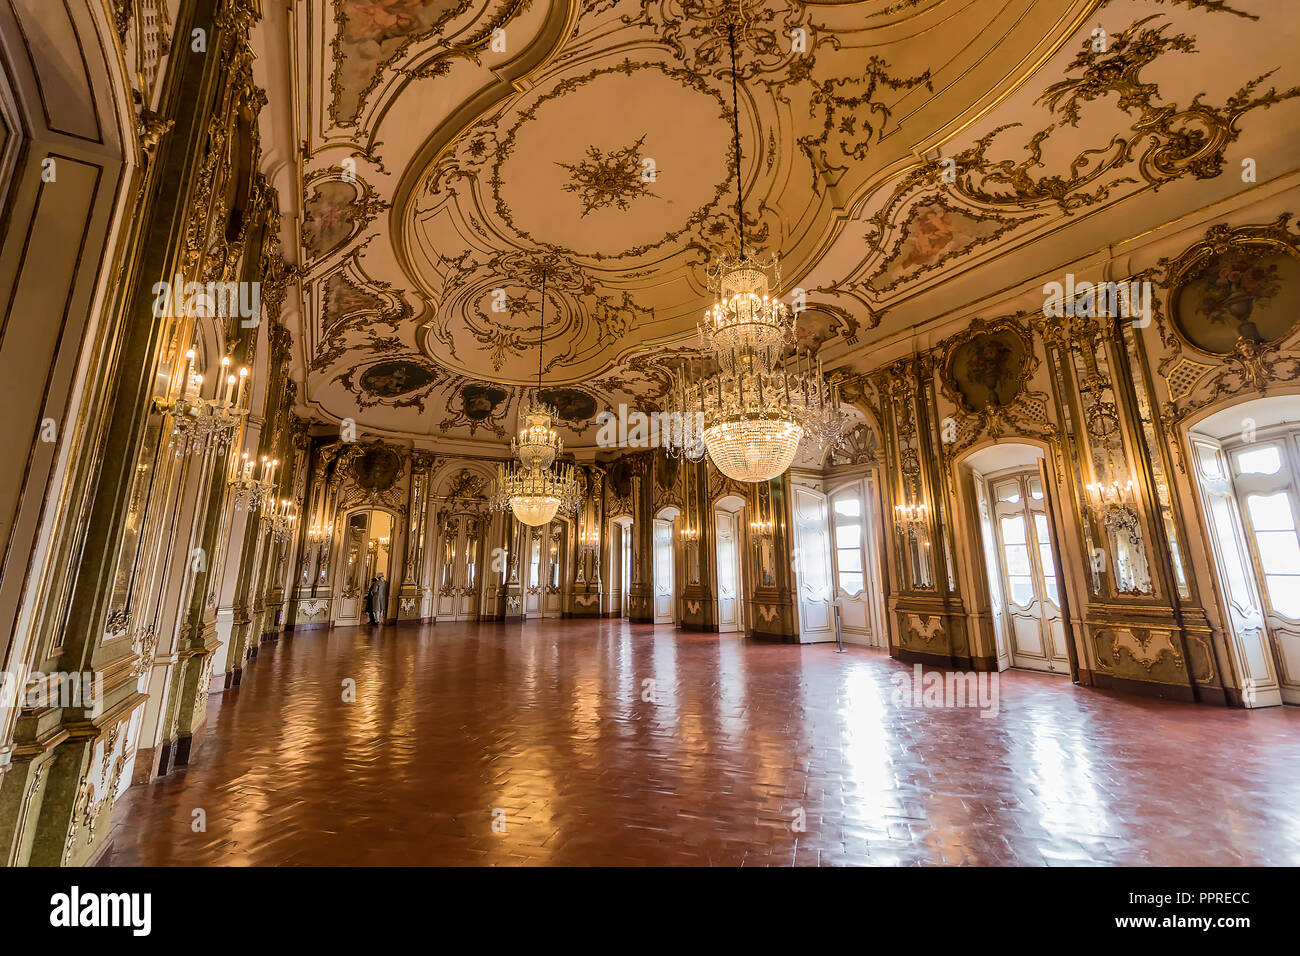 Queluz, Portugal - December 9, 2017: The Ballroom, rich decorated of Queluz Royal Palace. Formerly used as the Summer residence by the Portuguese roya Stock Photo